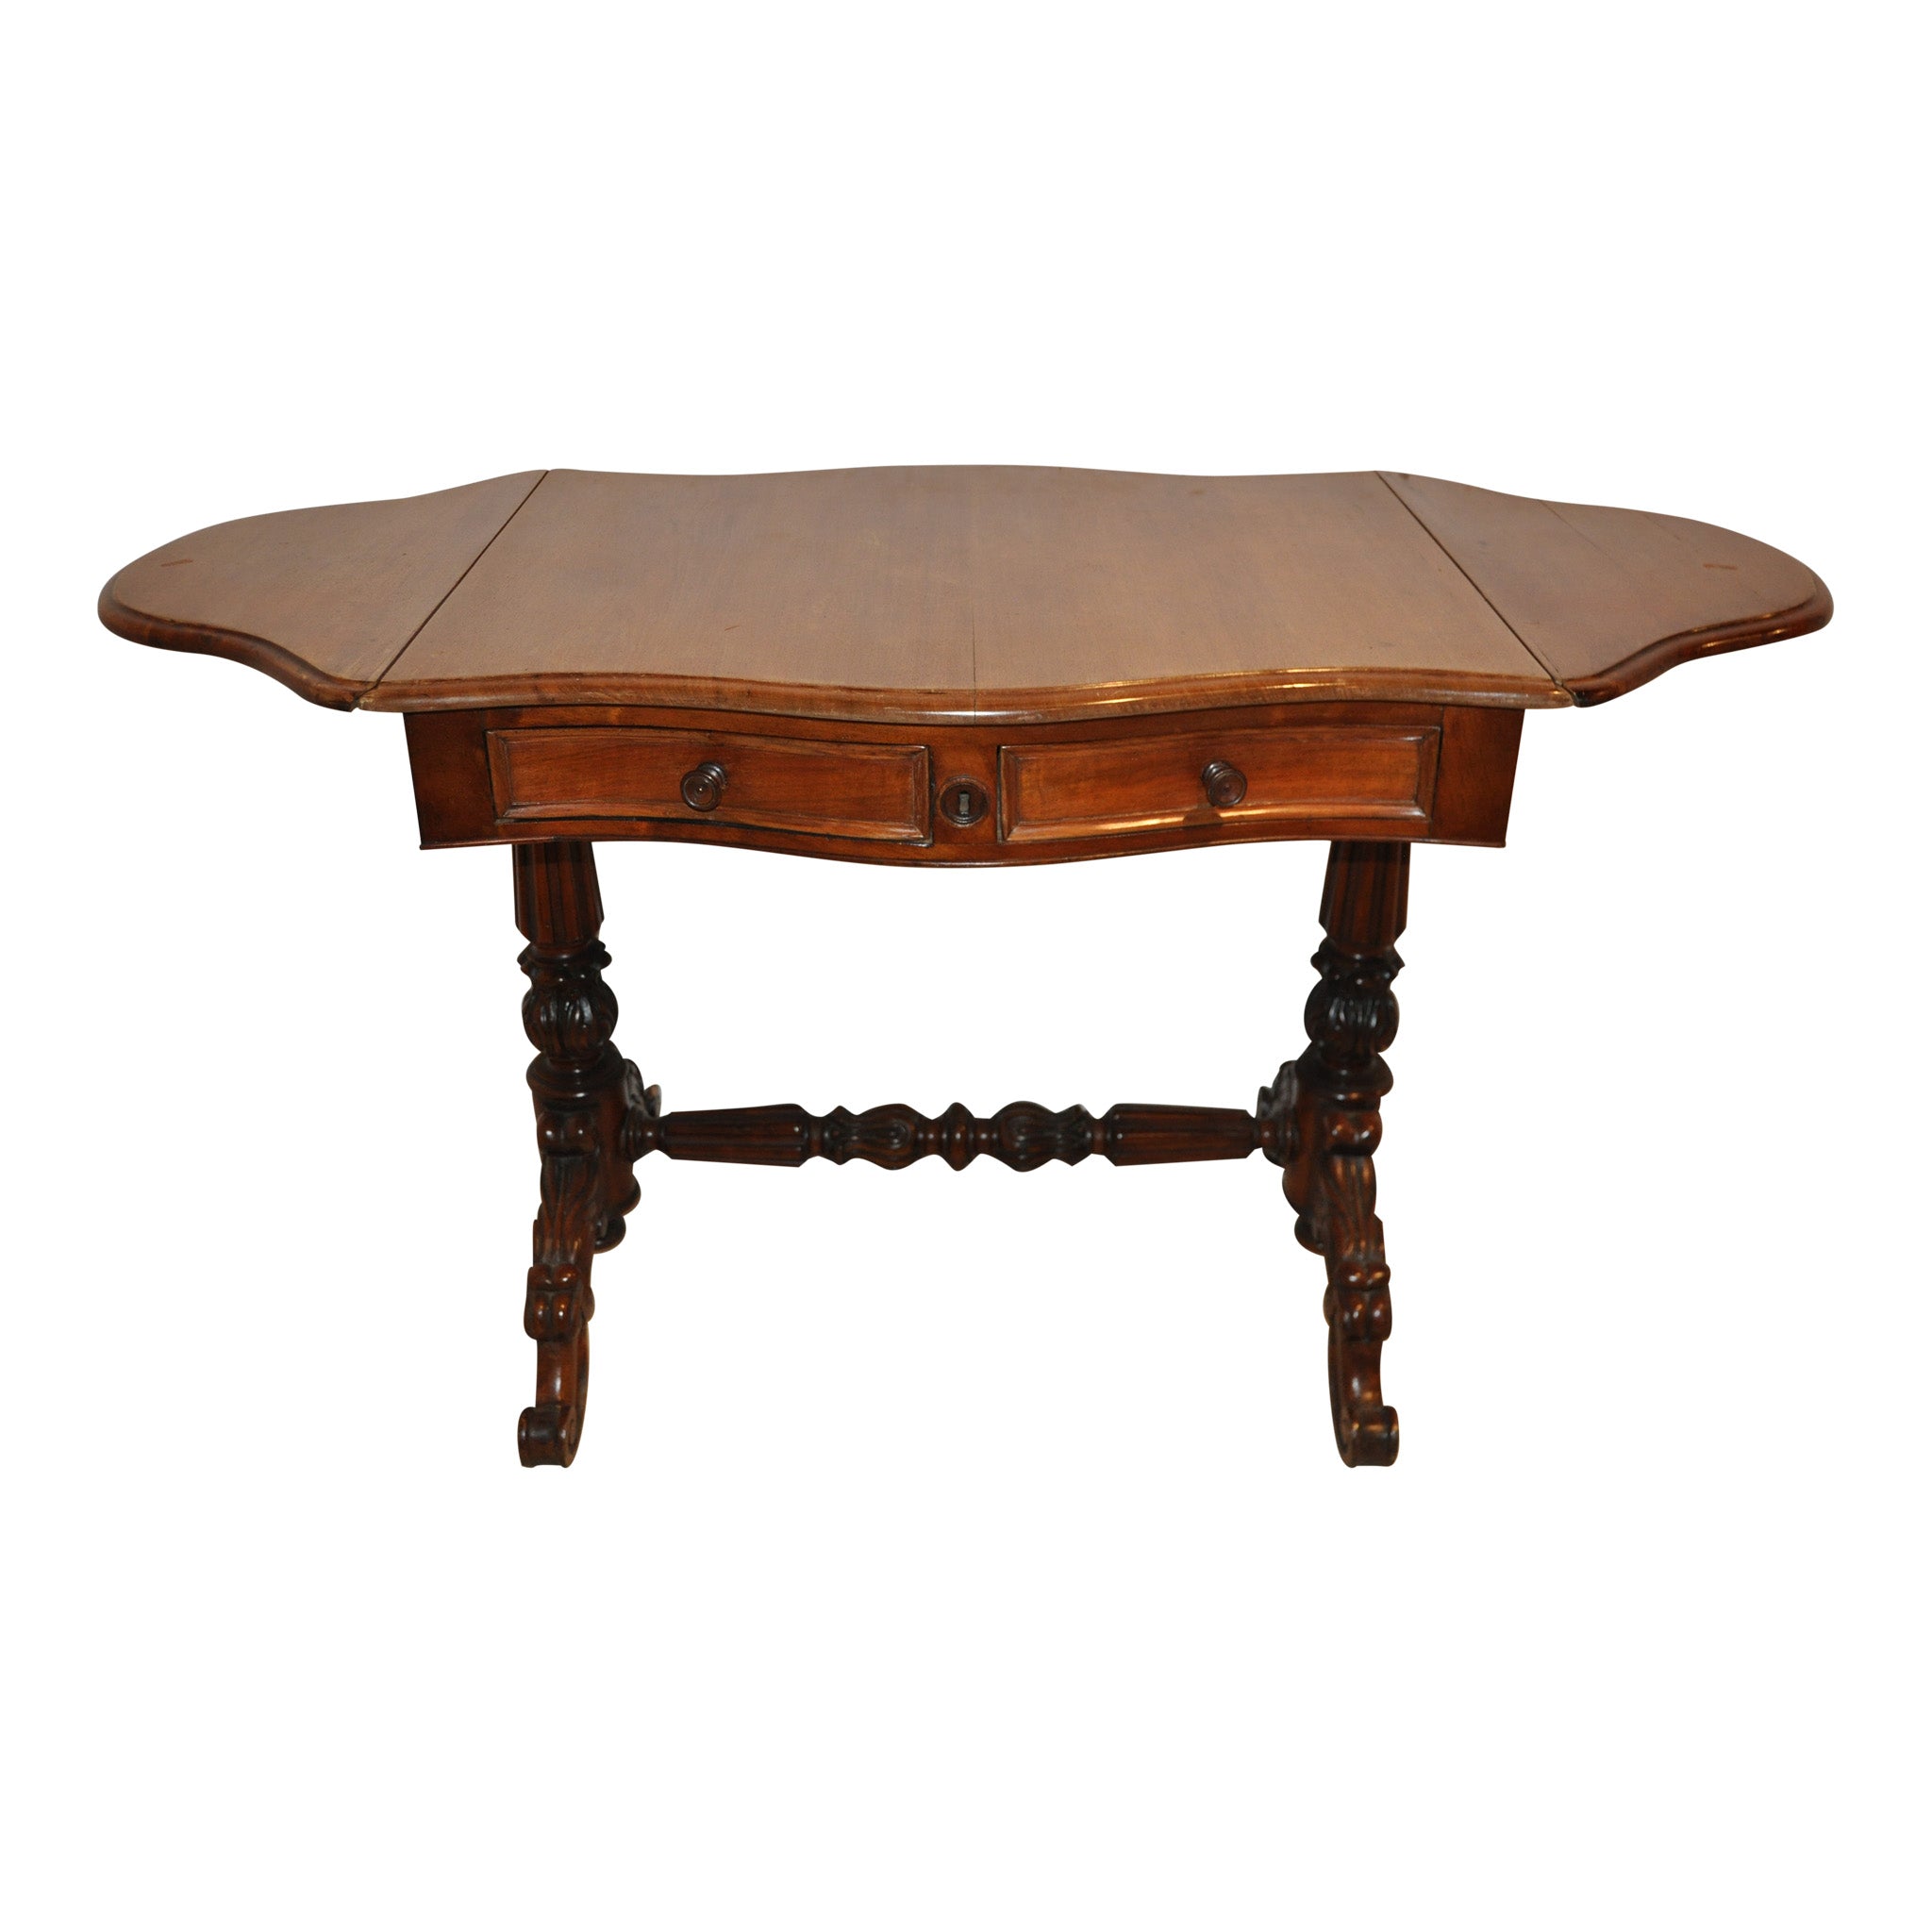 Mahogany Pembroke Table with Drop Leaf Sides